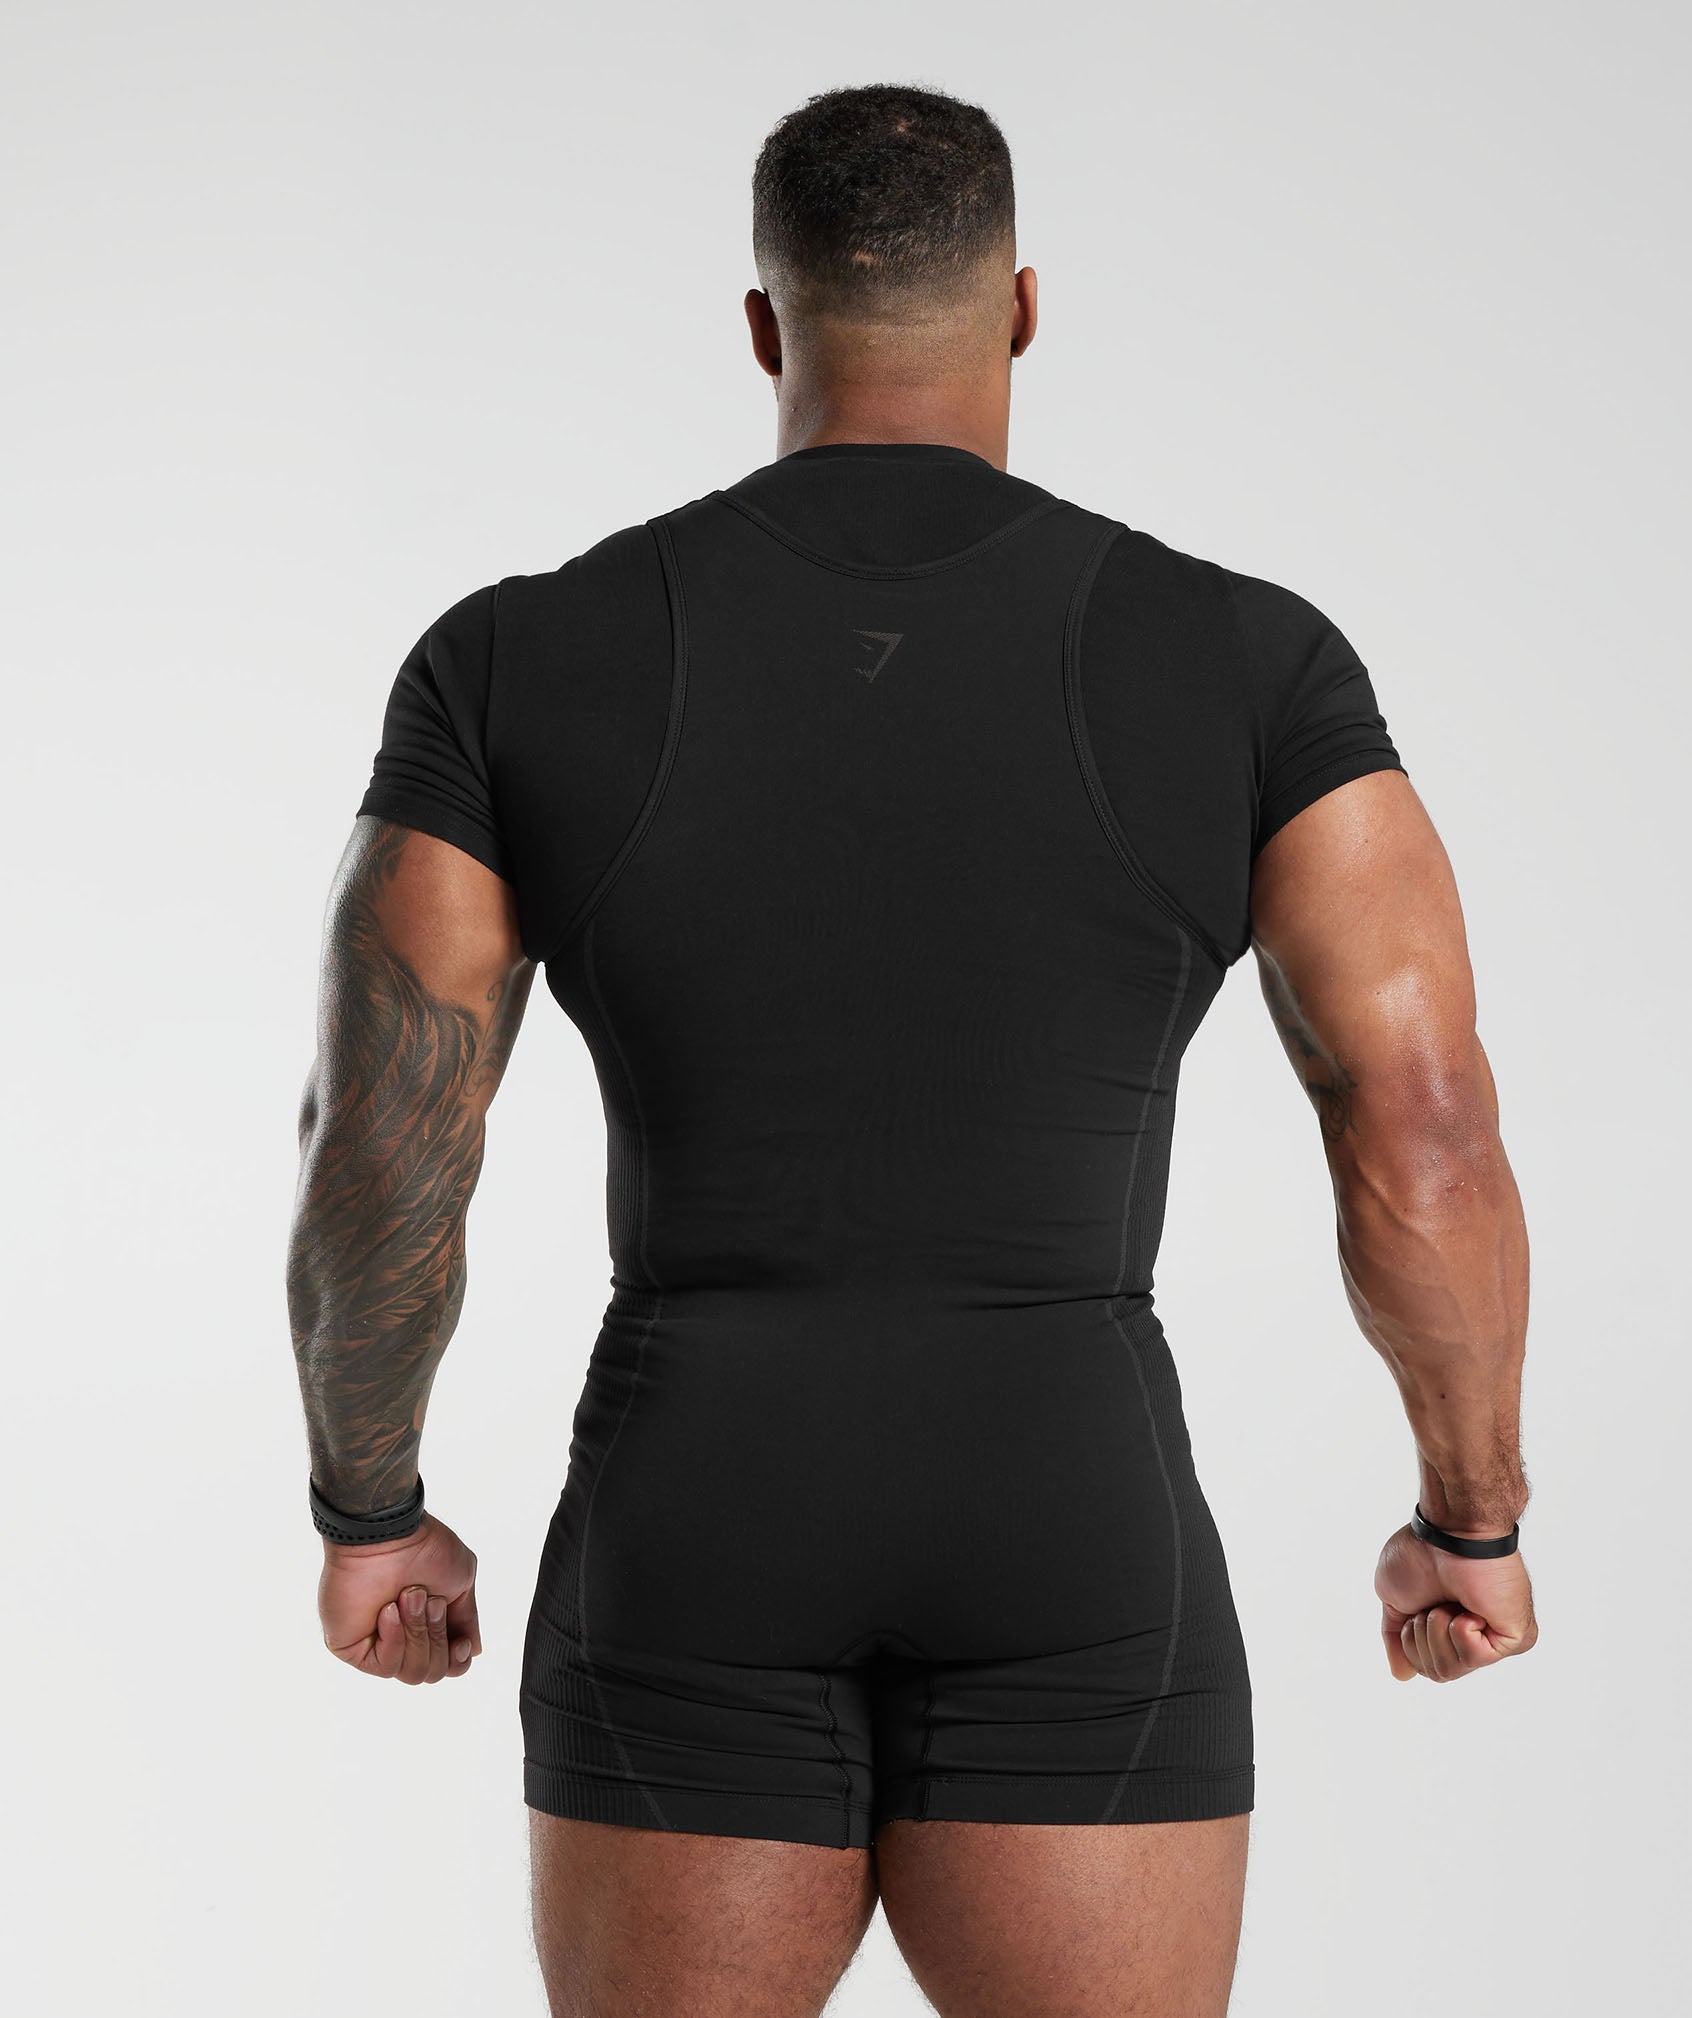 Seamless Singlet in Black/Charcoal Grey - view 4